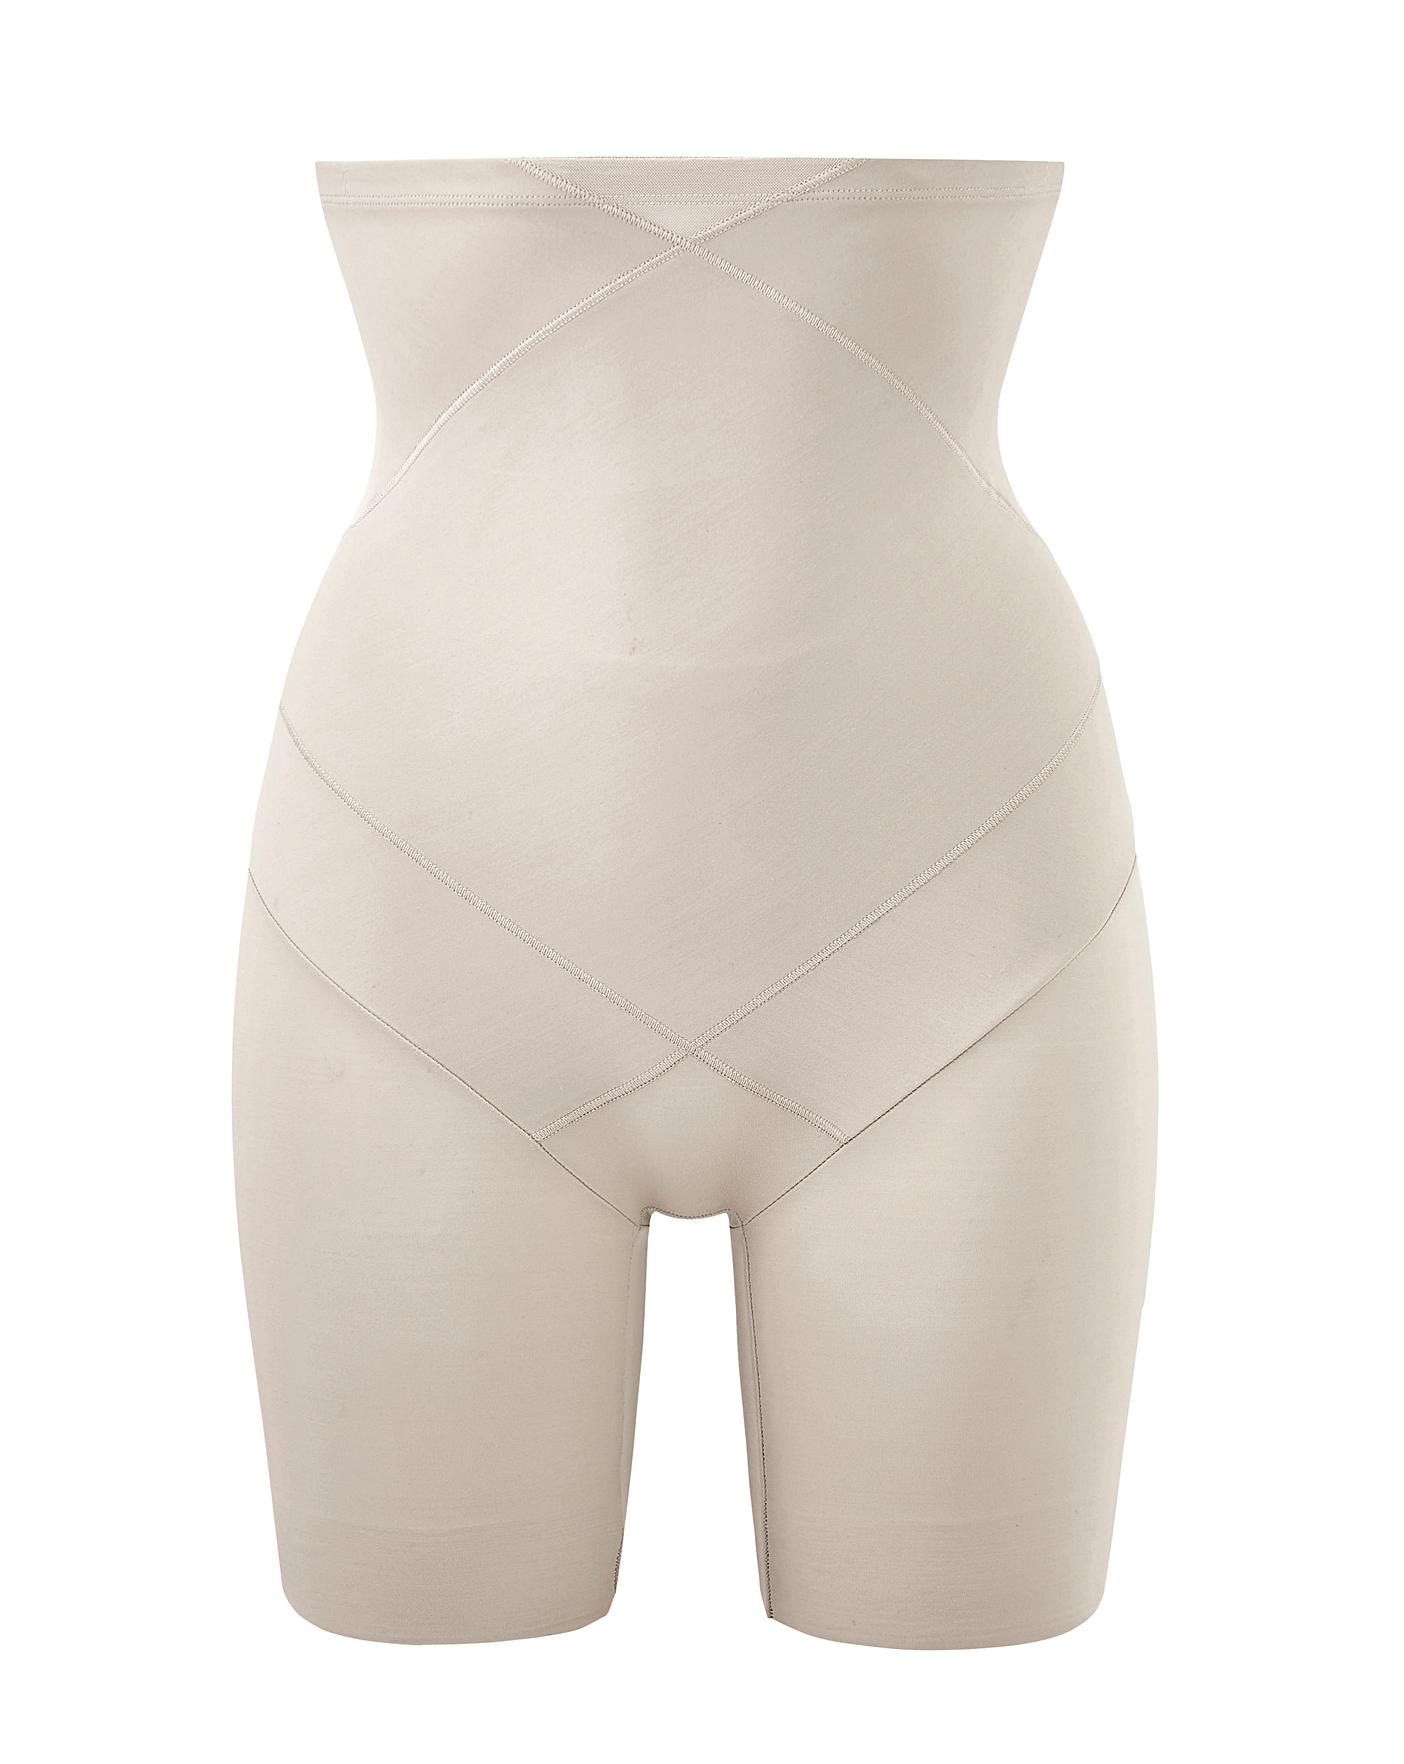 Miraclesuit Instant Tummy Tuck Firm Control Hi Waist Brief